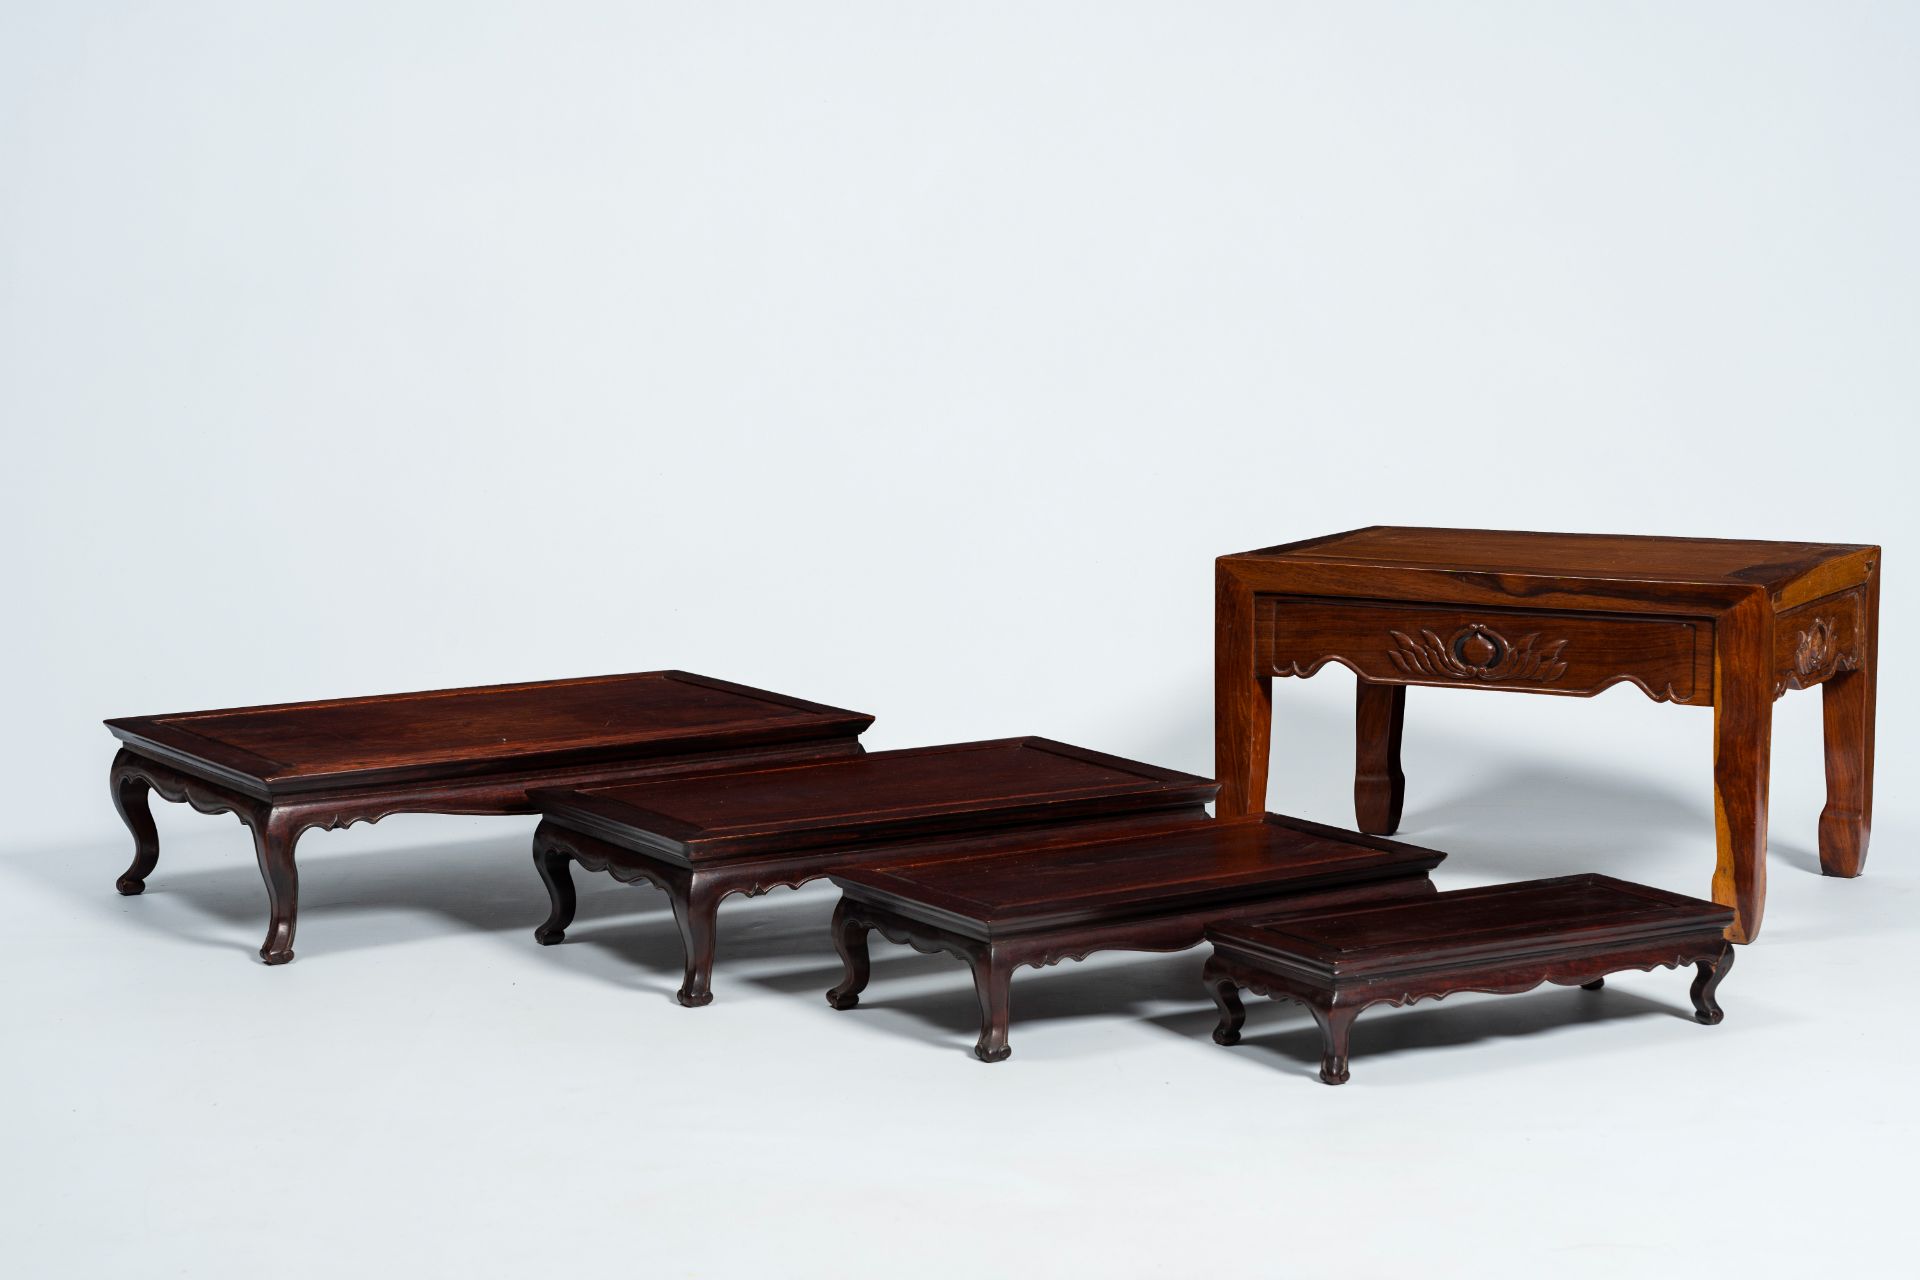 Four Chinese rectangular wood nesting tables and a side table with floral design, 20th C.